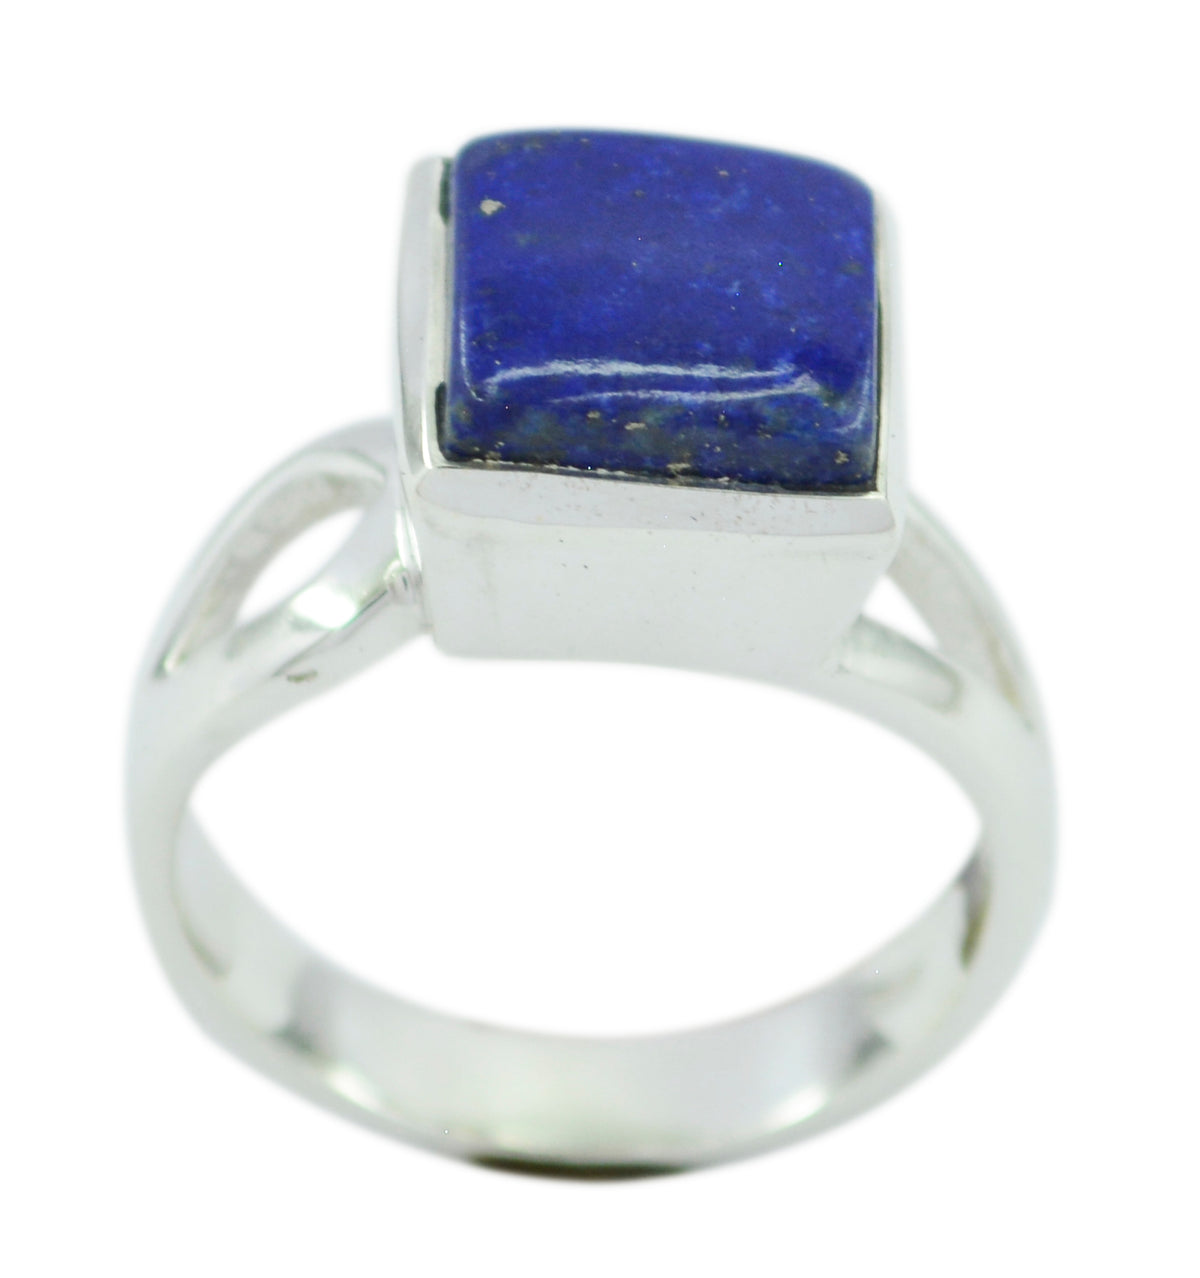 Riyo Comely Gem Lapis Lazuli 925 Sterling Silver Ring Snap Jewelry